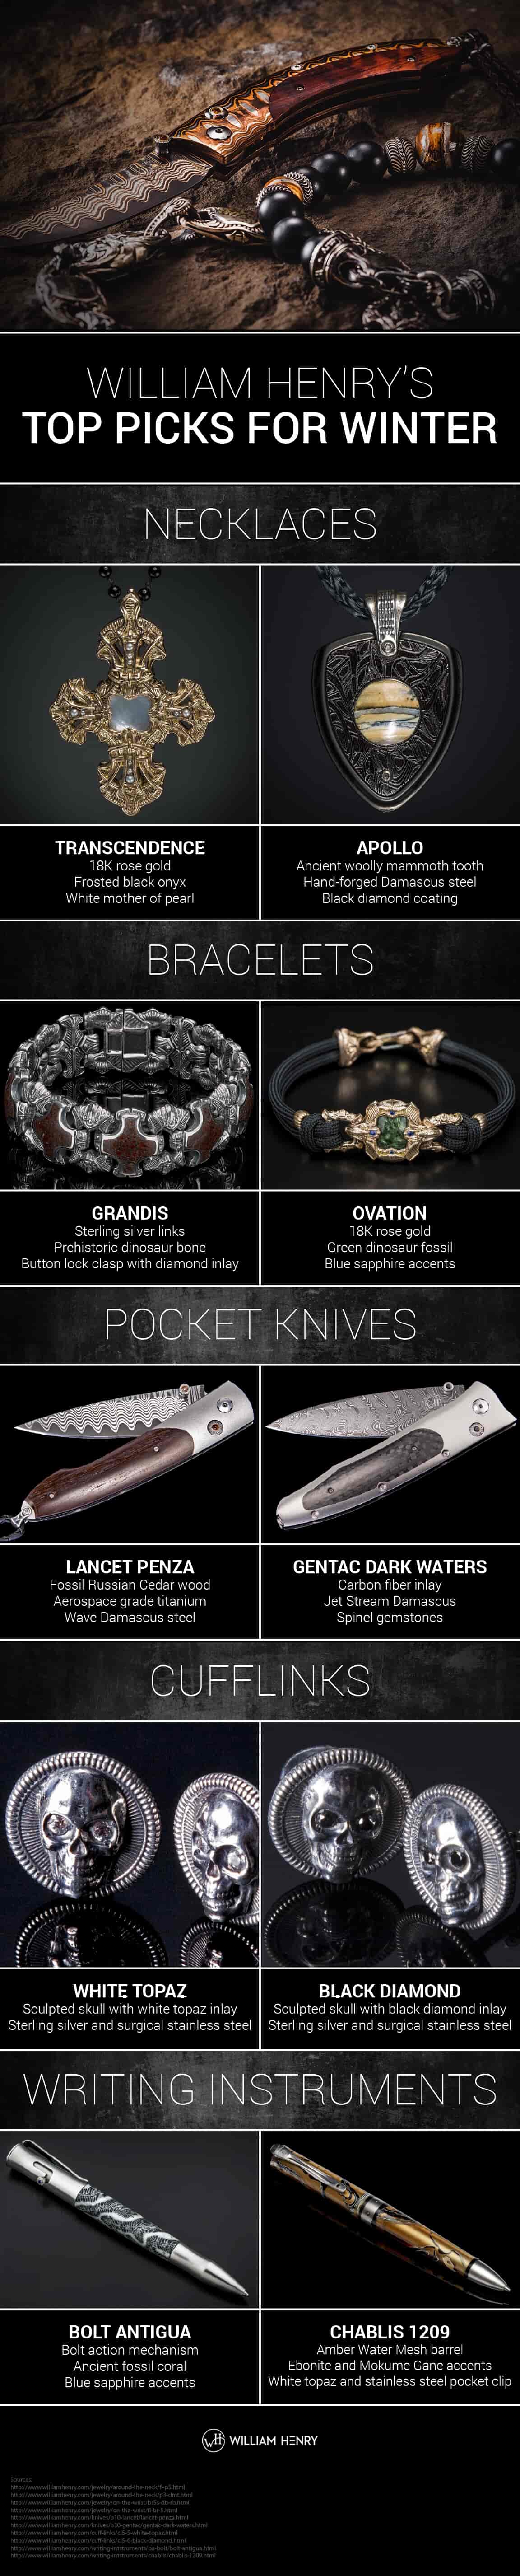 william henry top necklaces, bracelets, pocket knives, and cufflinks for winter